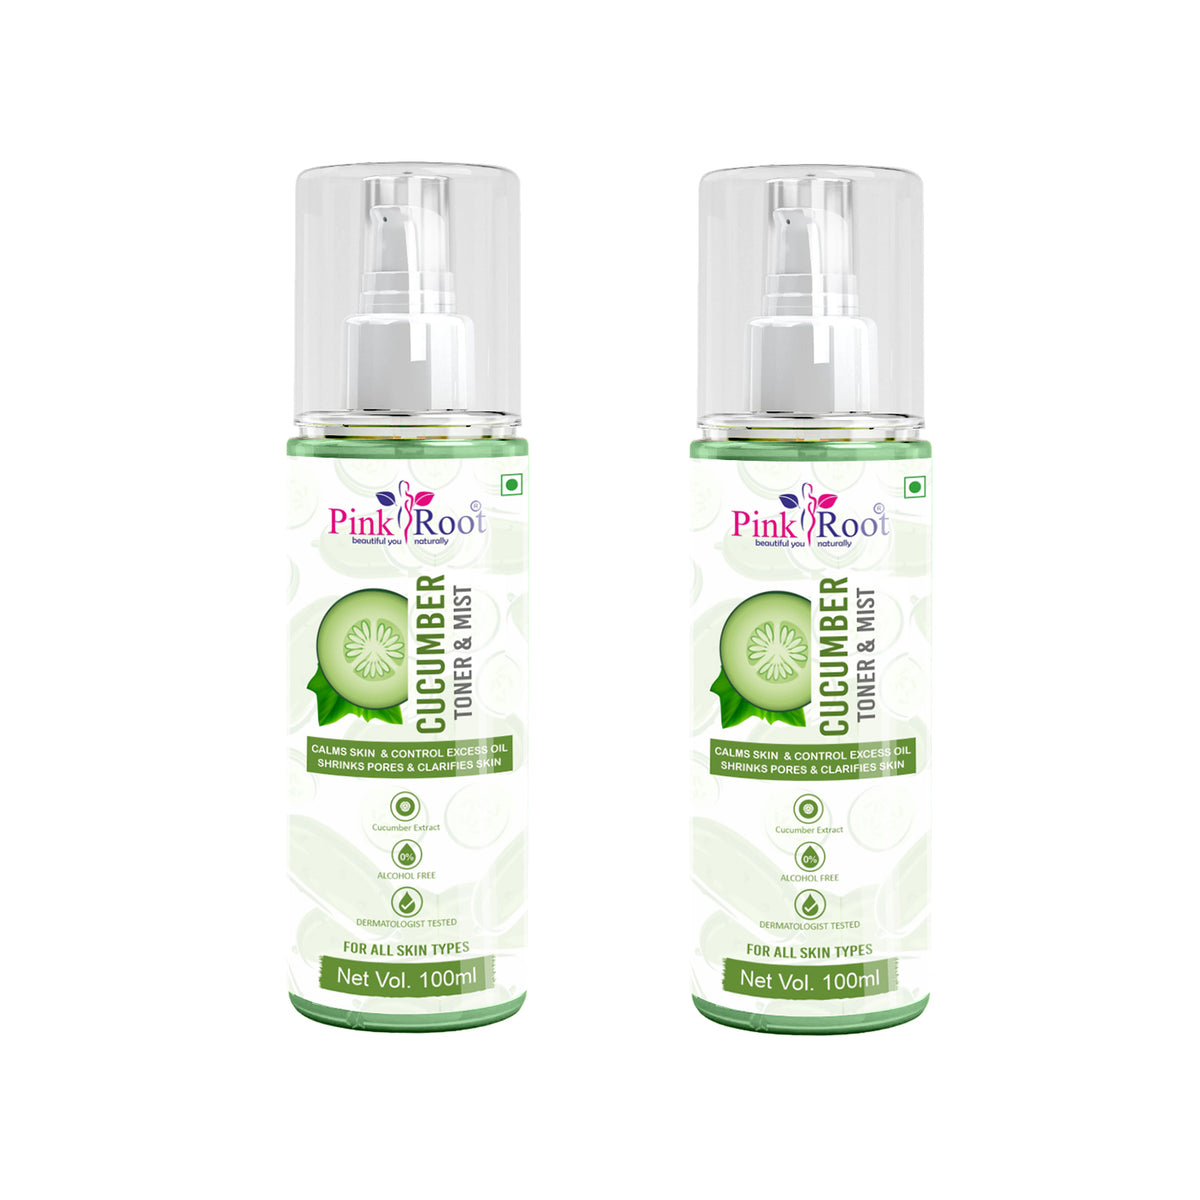 Pink Root Cucumber Toner & Mist 100ml, Hydrating Pore Tightening Moisturizing Revitalising Face Spray Toner for All Skin Types, Natural, No Alcohol, Parabens & Sulphates (Pack of 2)